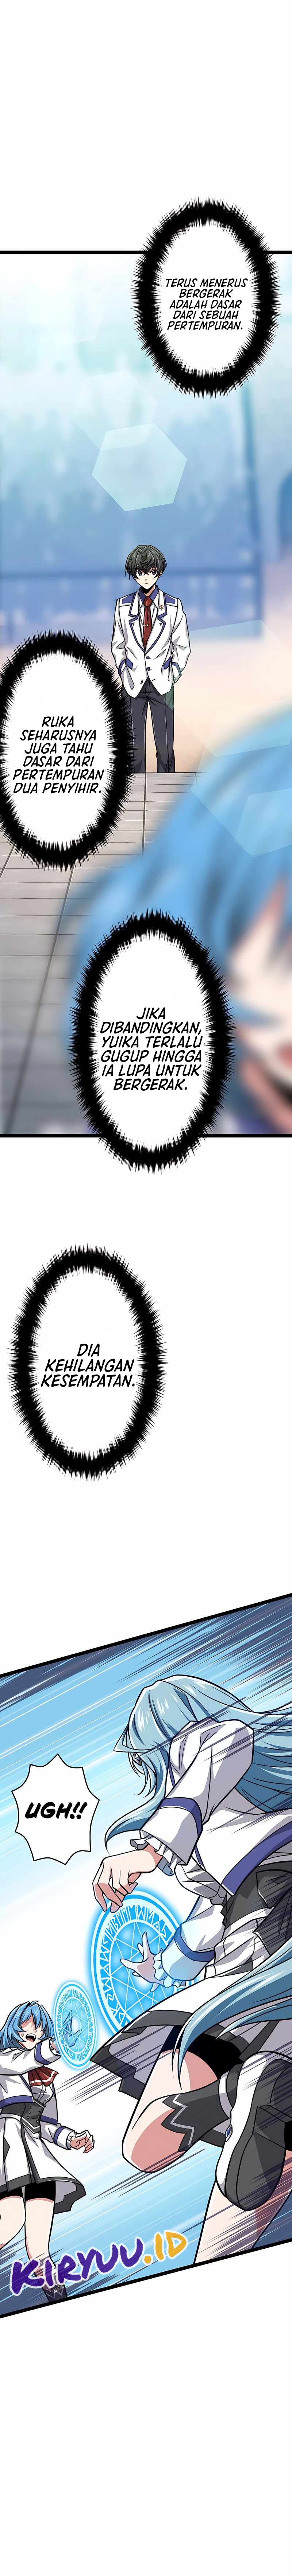 Magic Level 99990000 All-Attribute Great Sage Chapter 12 Bahasa Indonesia